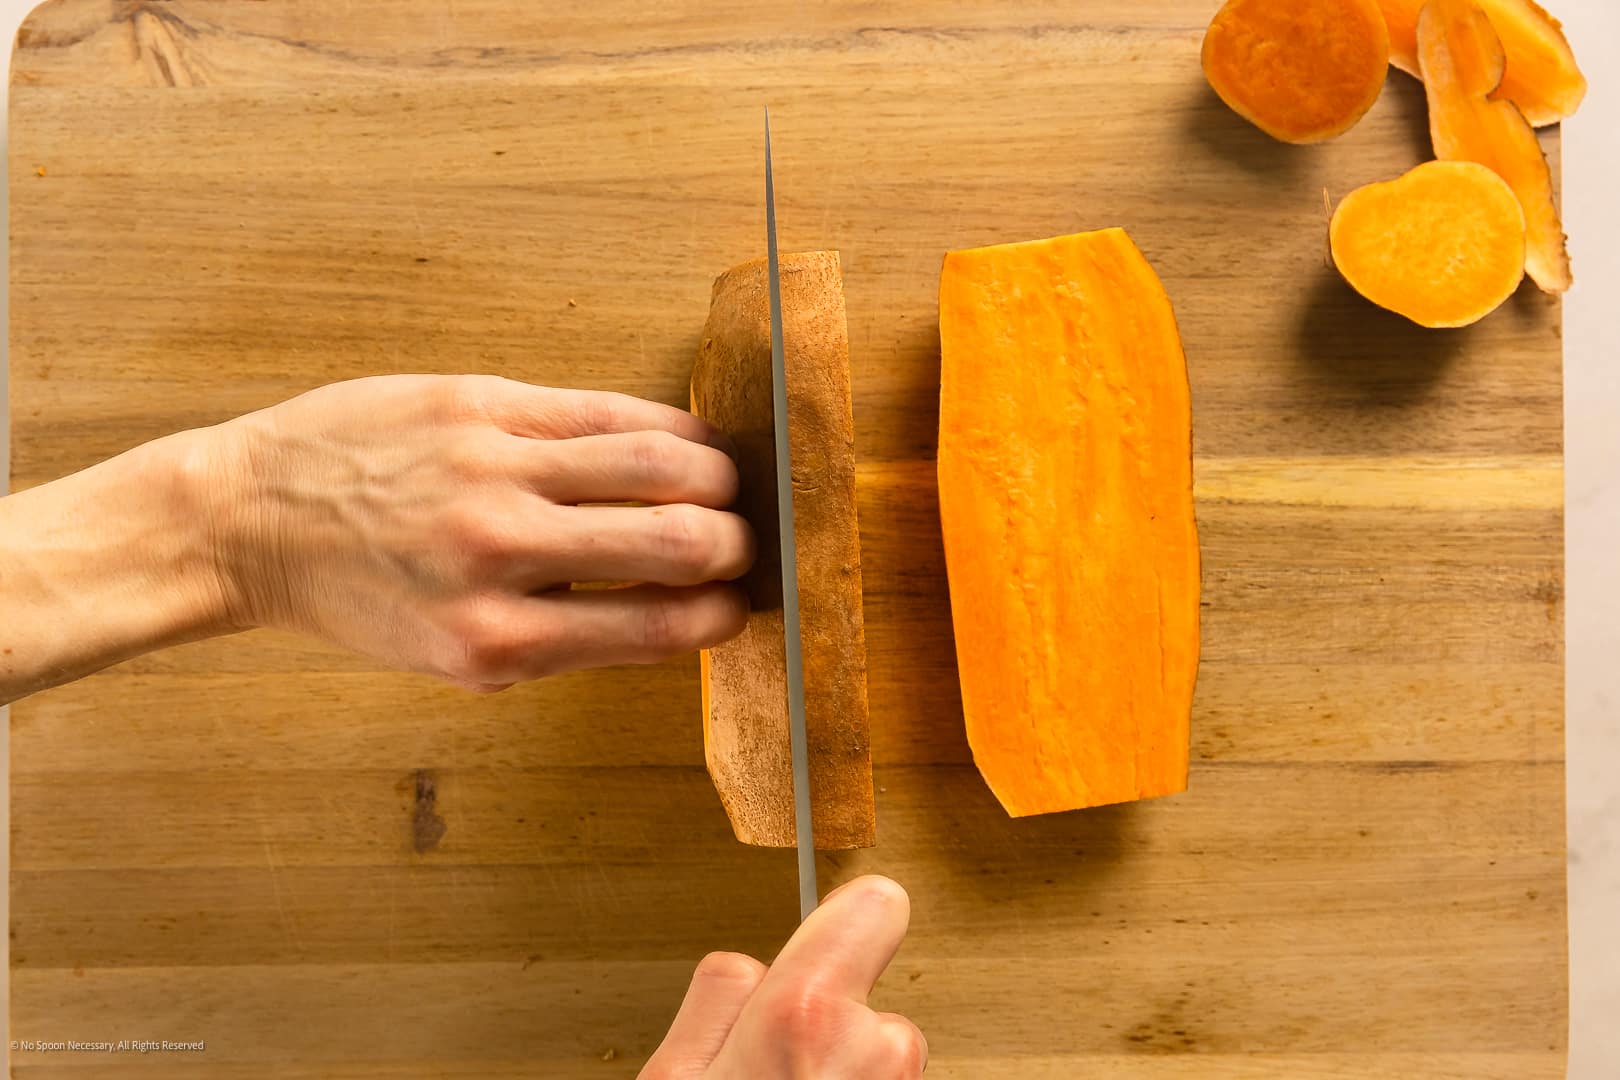 The A-Z Guide to Cutting Vegetables